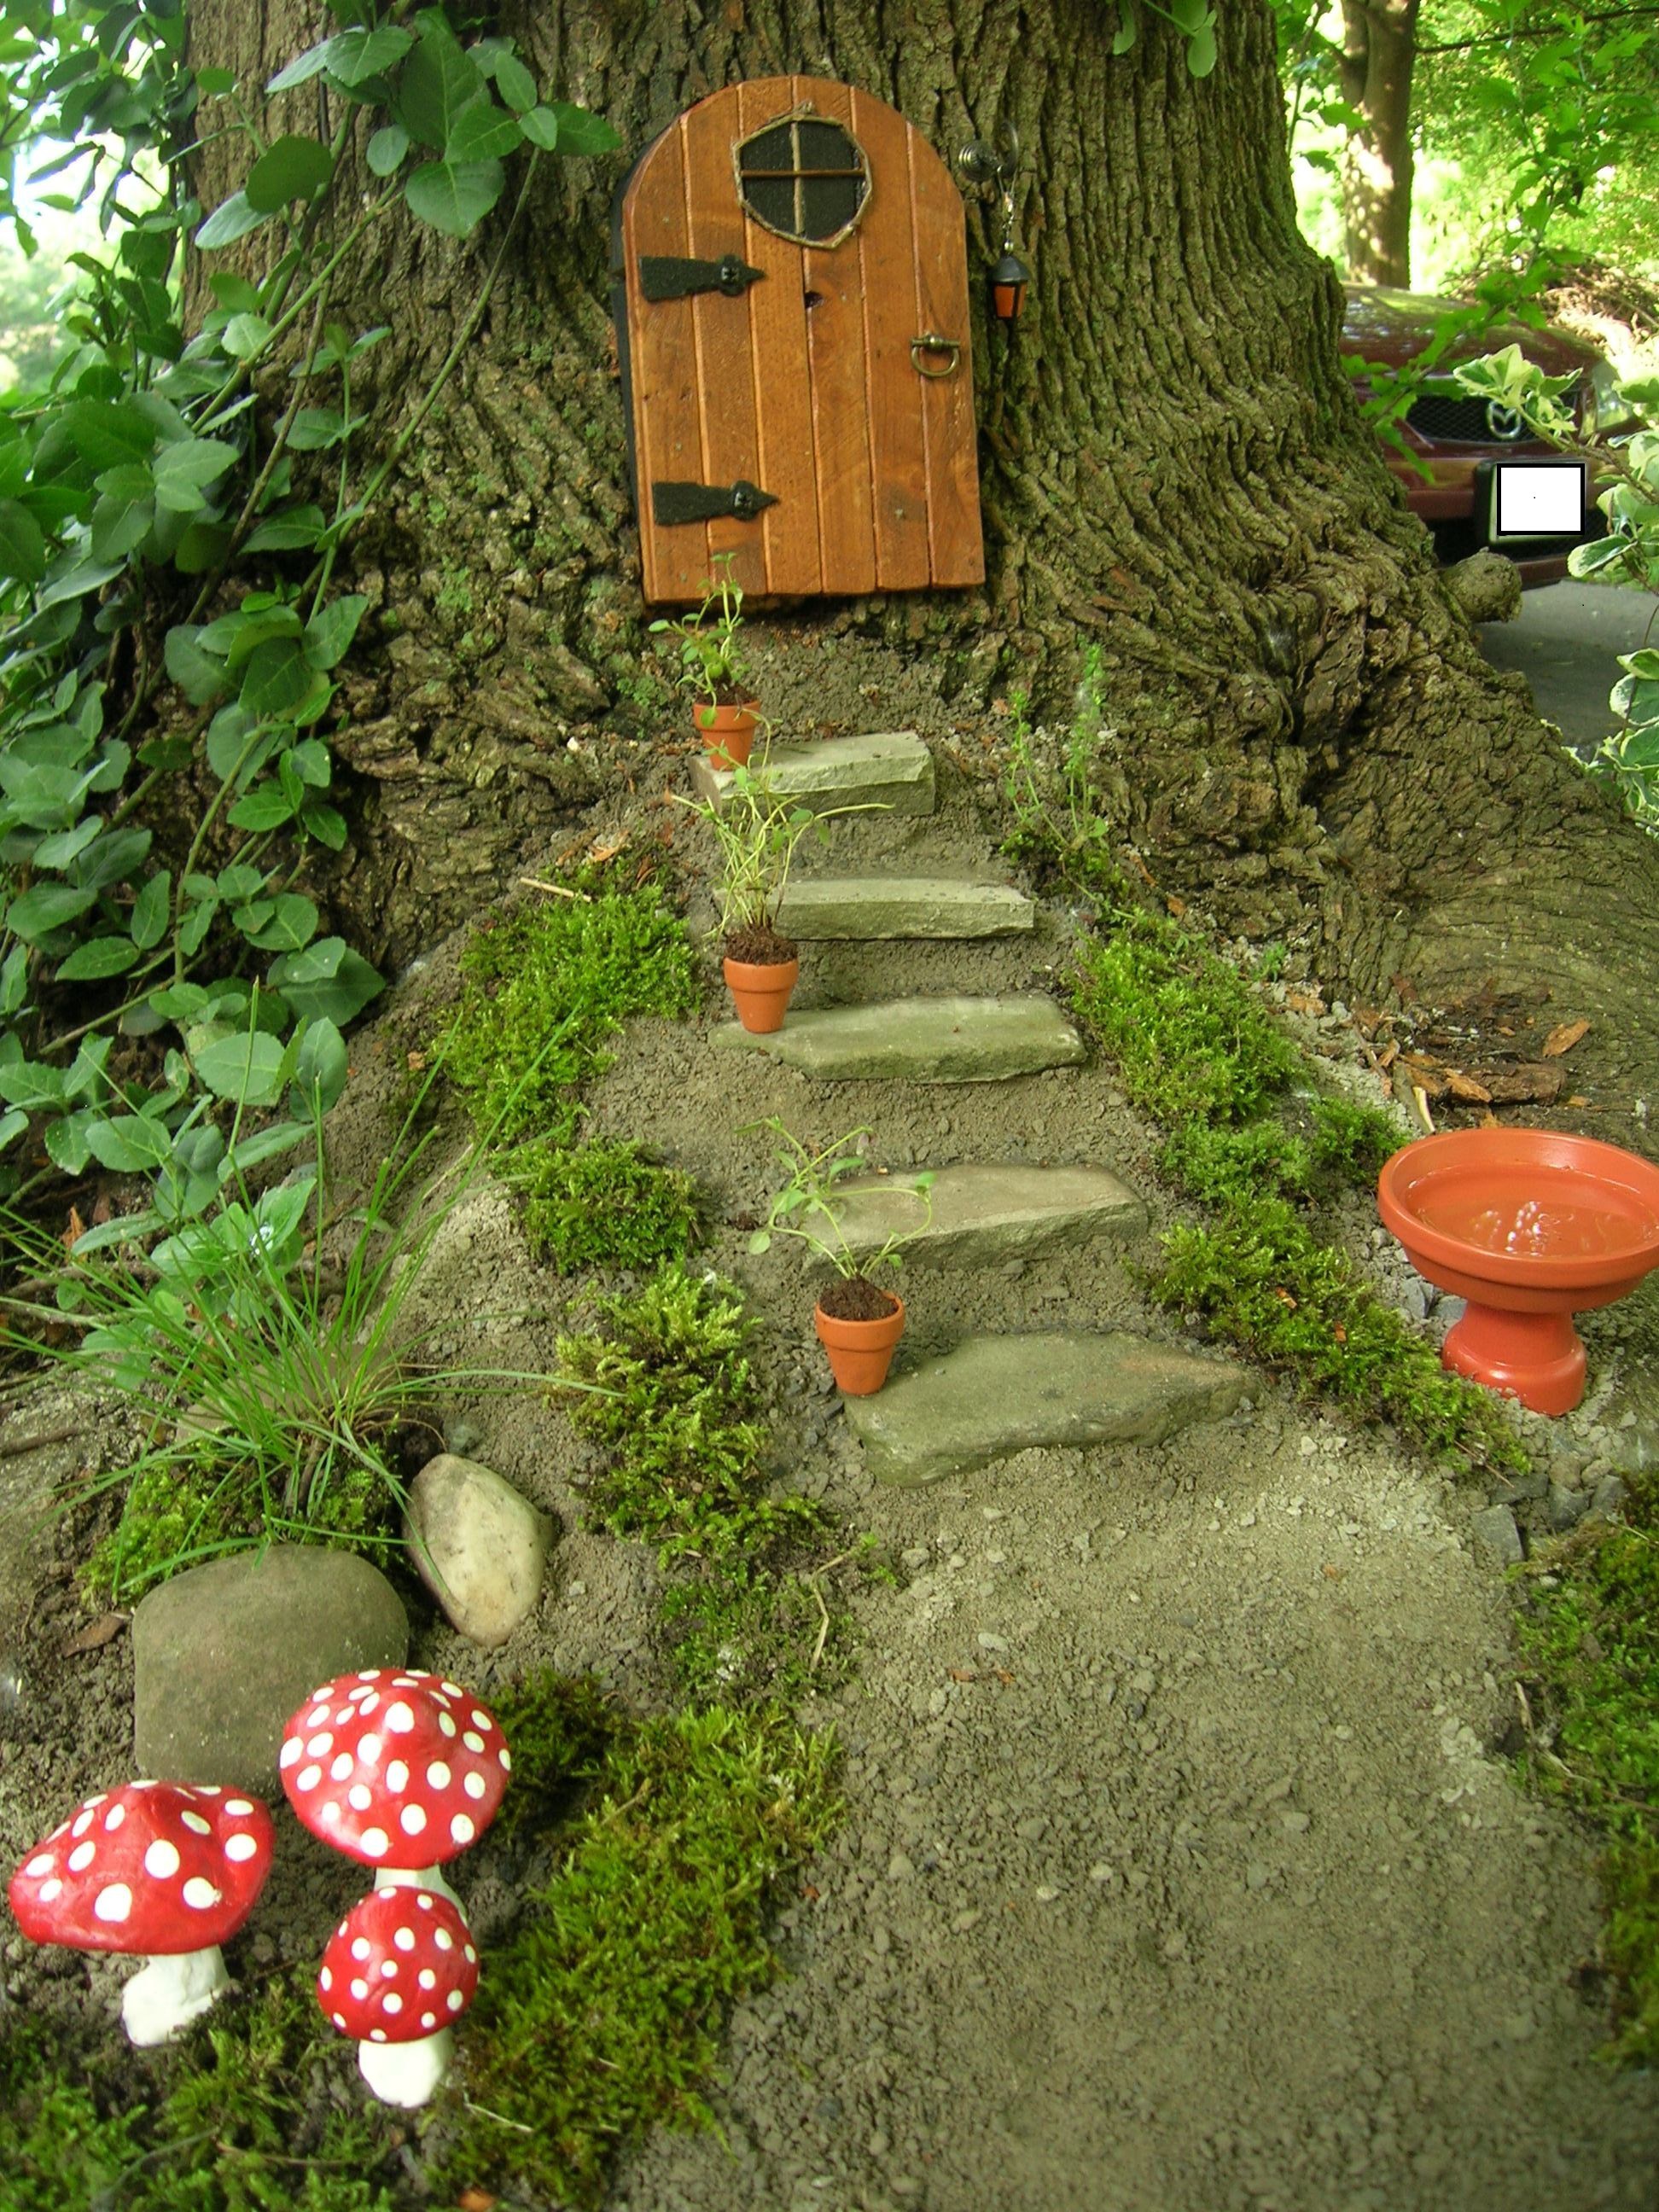 Tree Trunk Ideas That Make Excellent Decor For Your Garden   Page 2 of 3